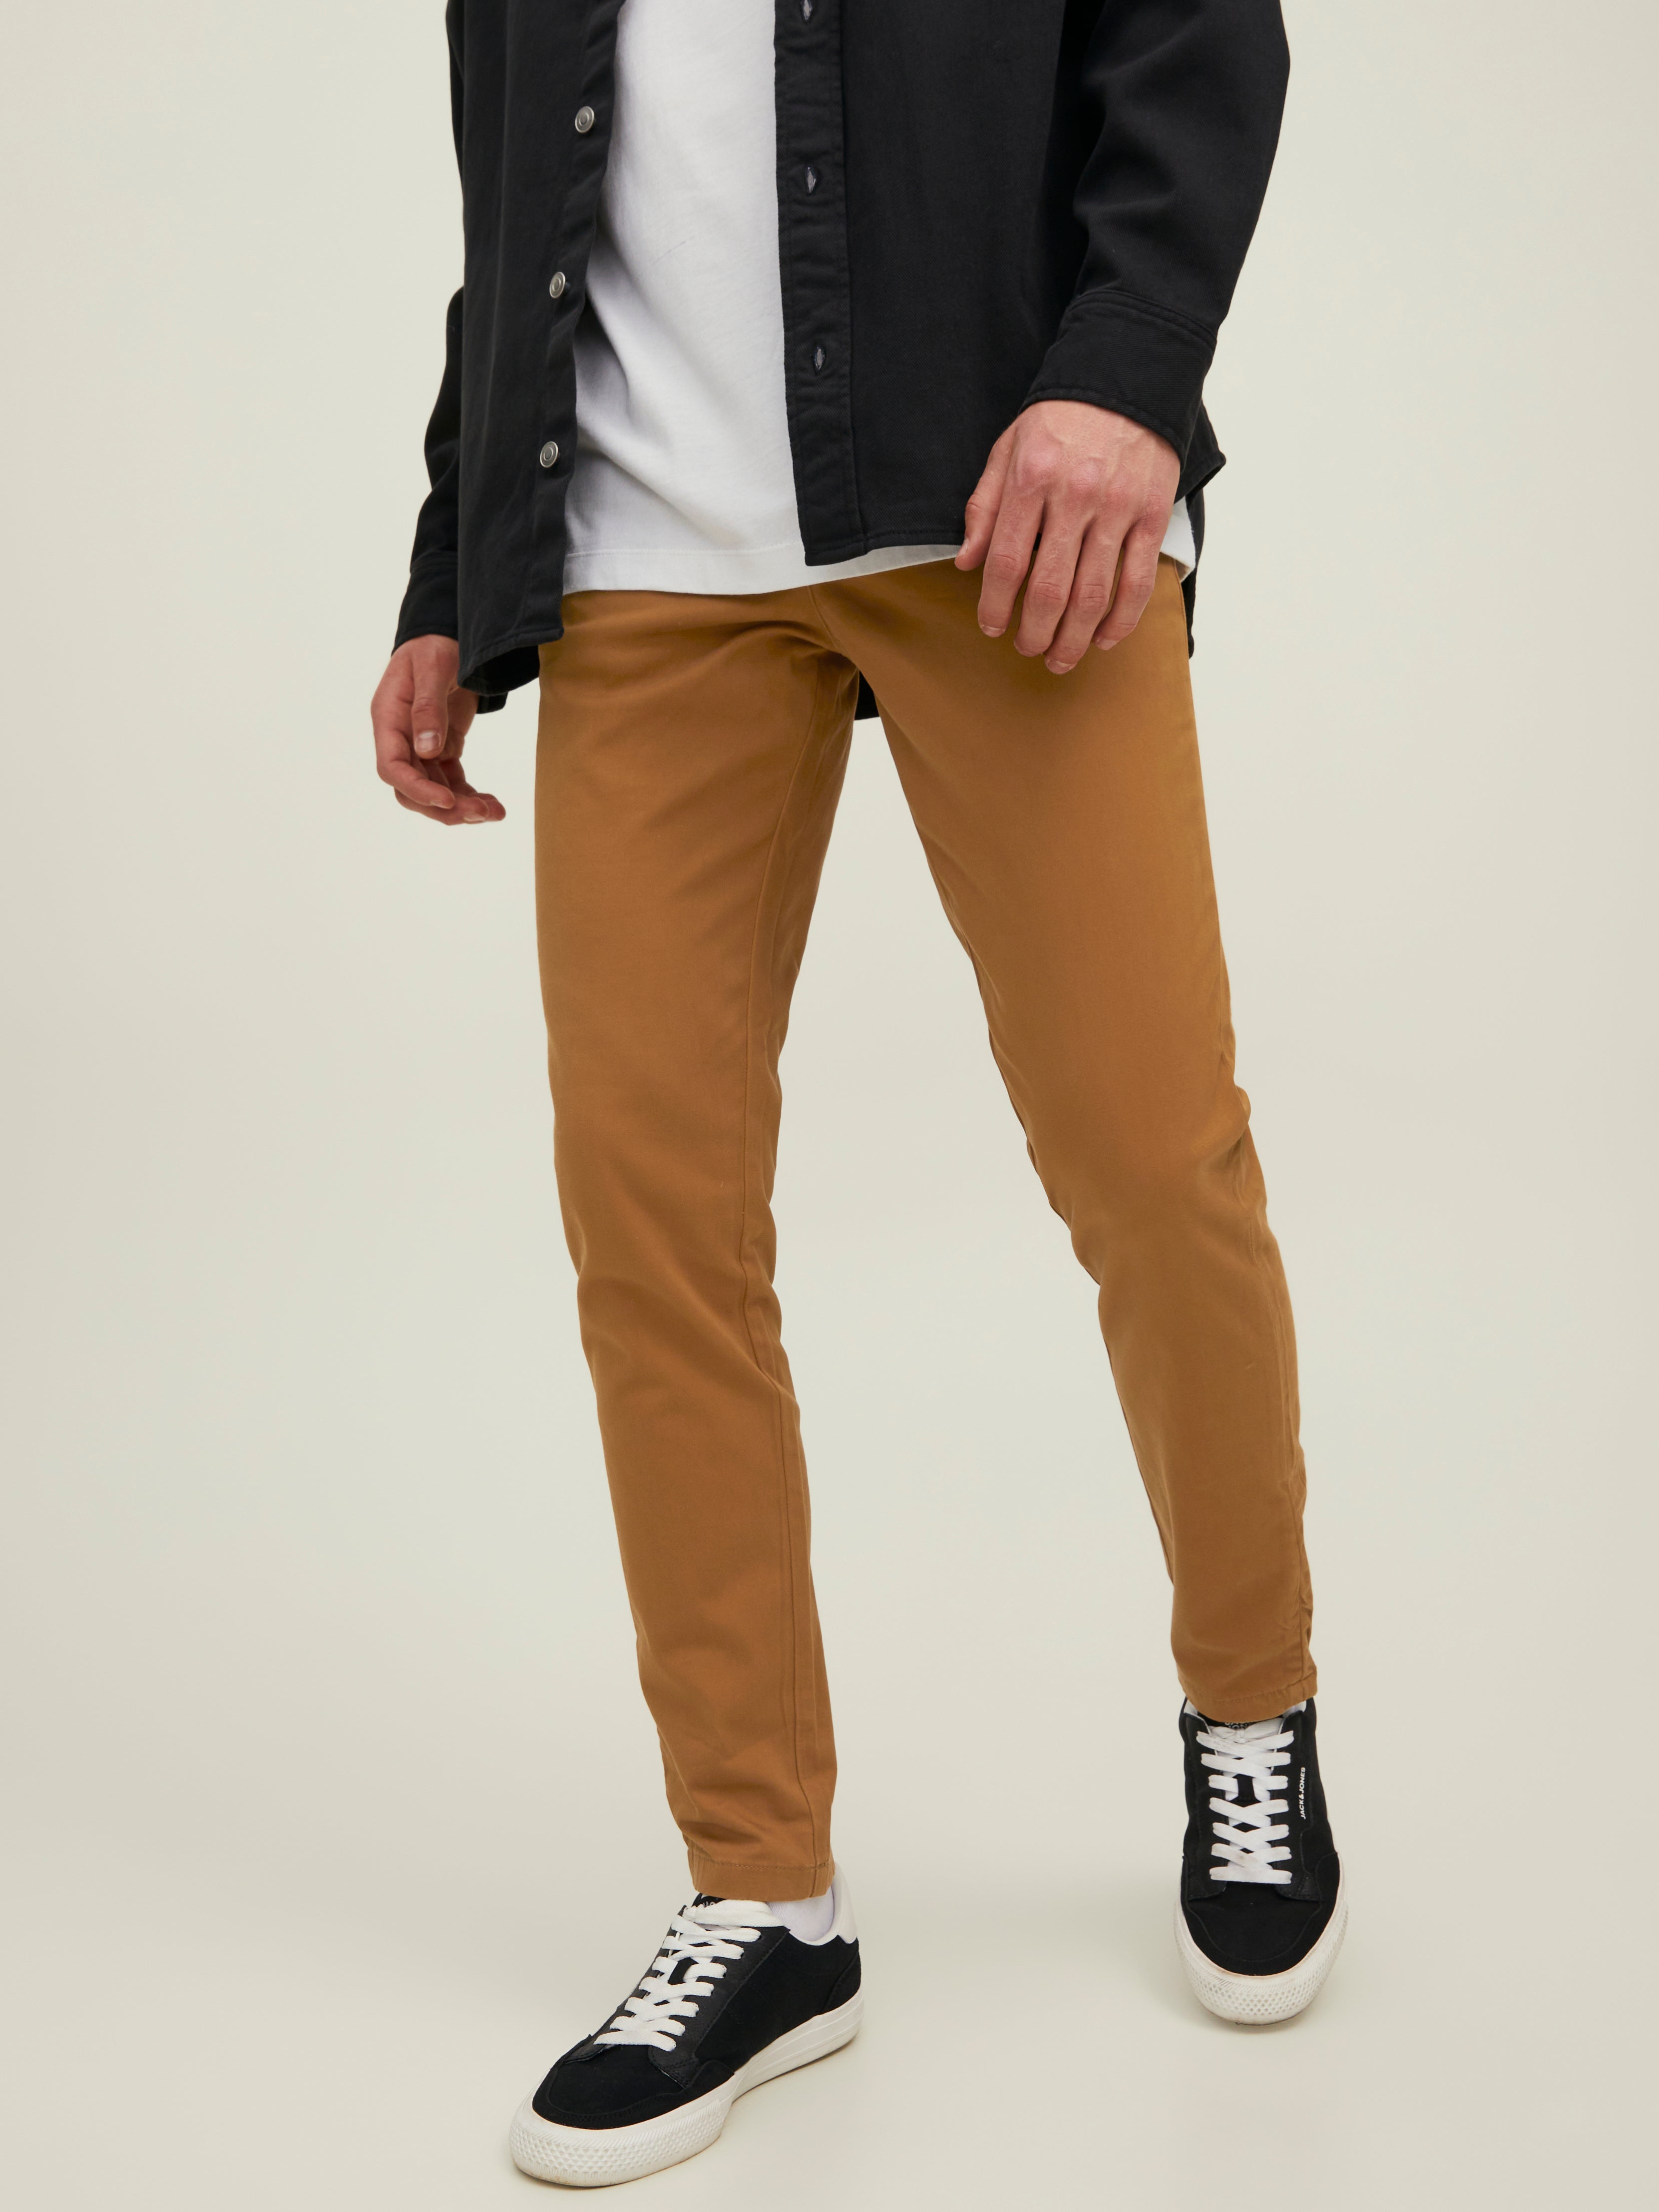 Rust orange shirt with classic grey trousers – Puneetkapoorlabel